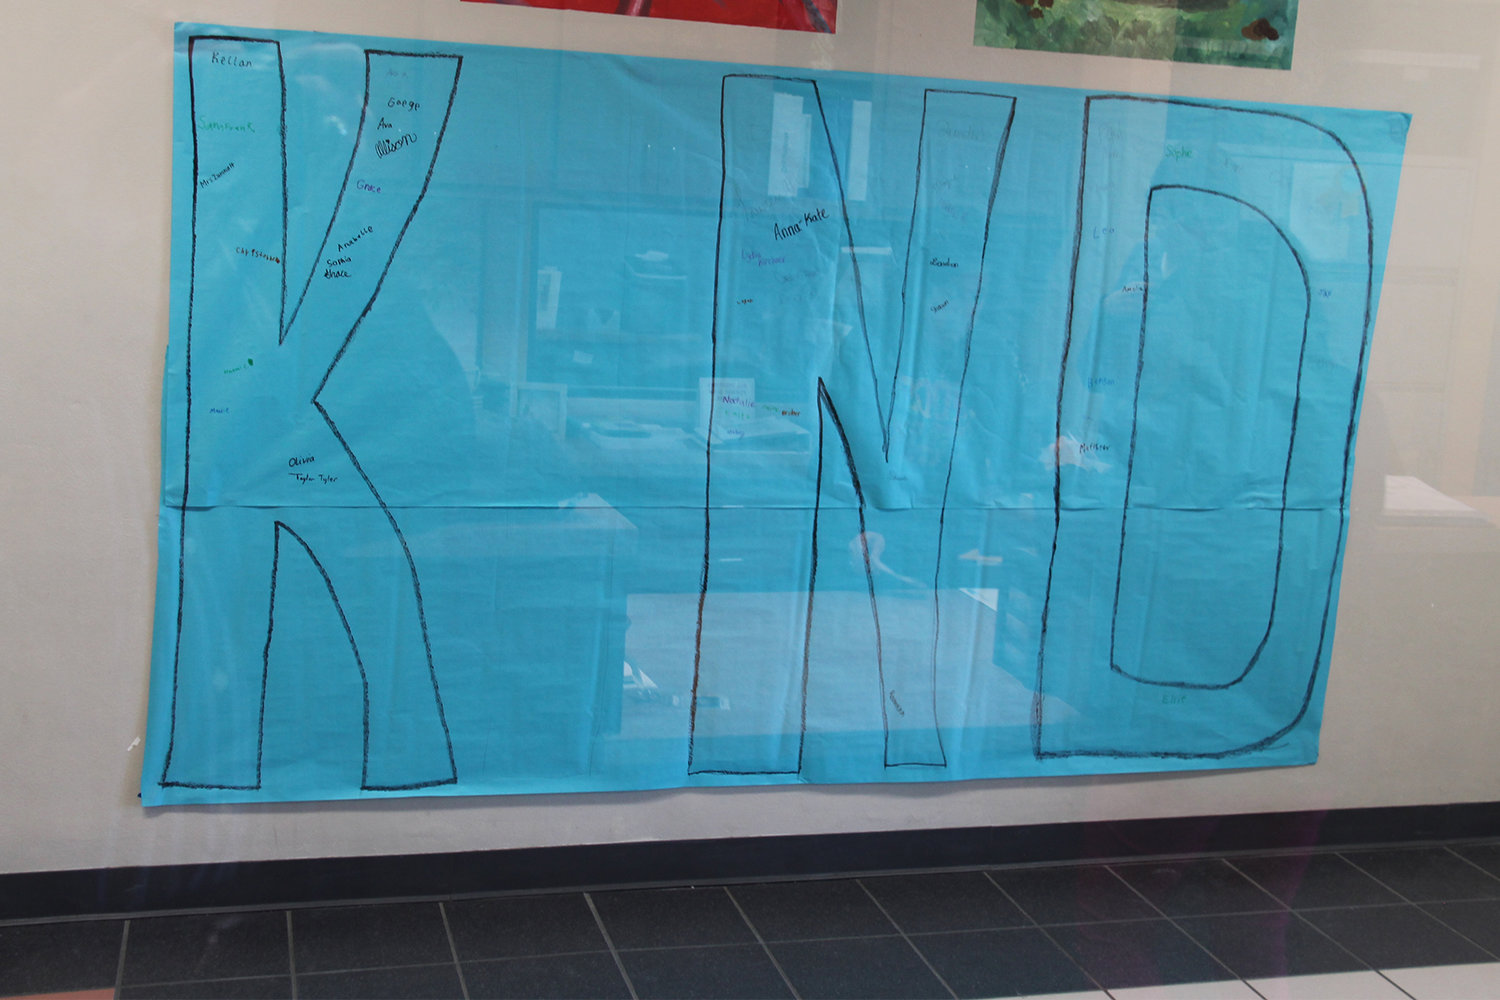 A large banner shows illustrates that you can't spell "KIND" without "I."